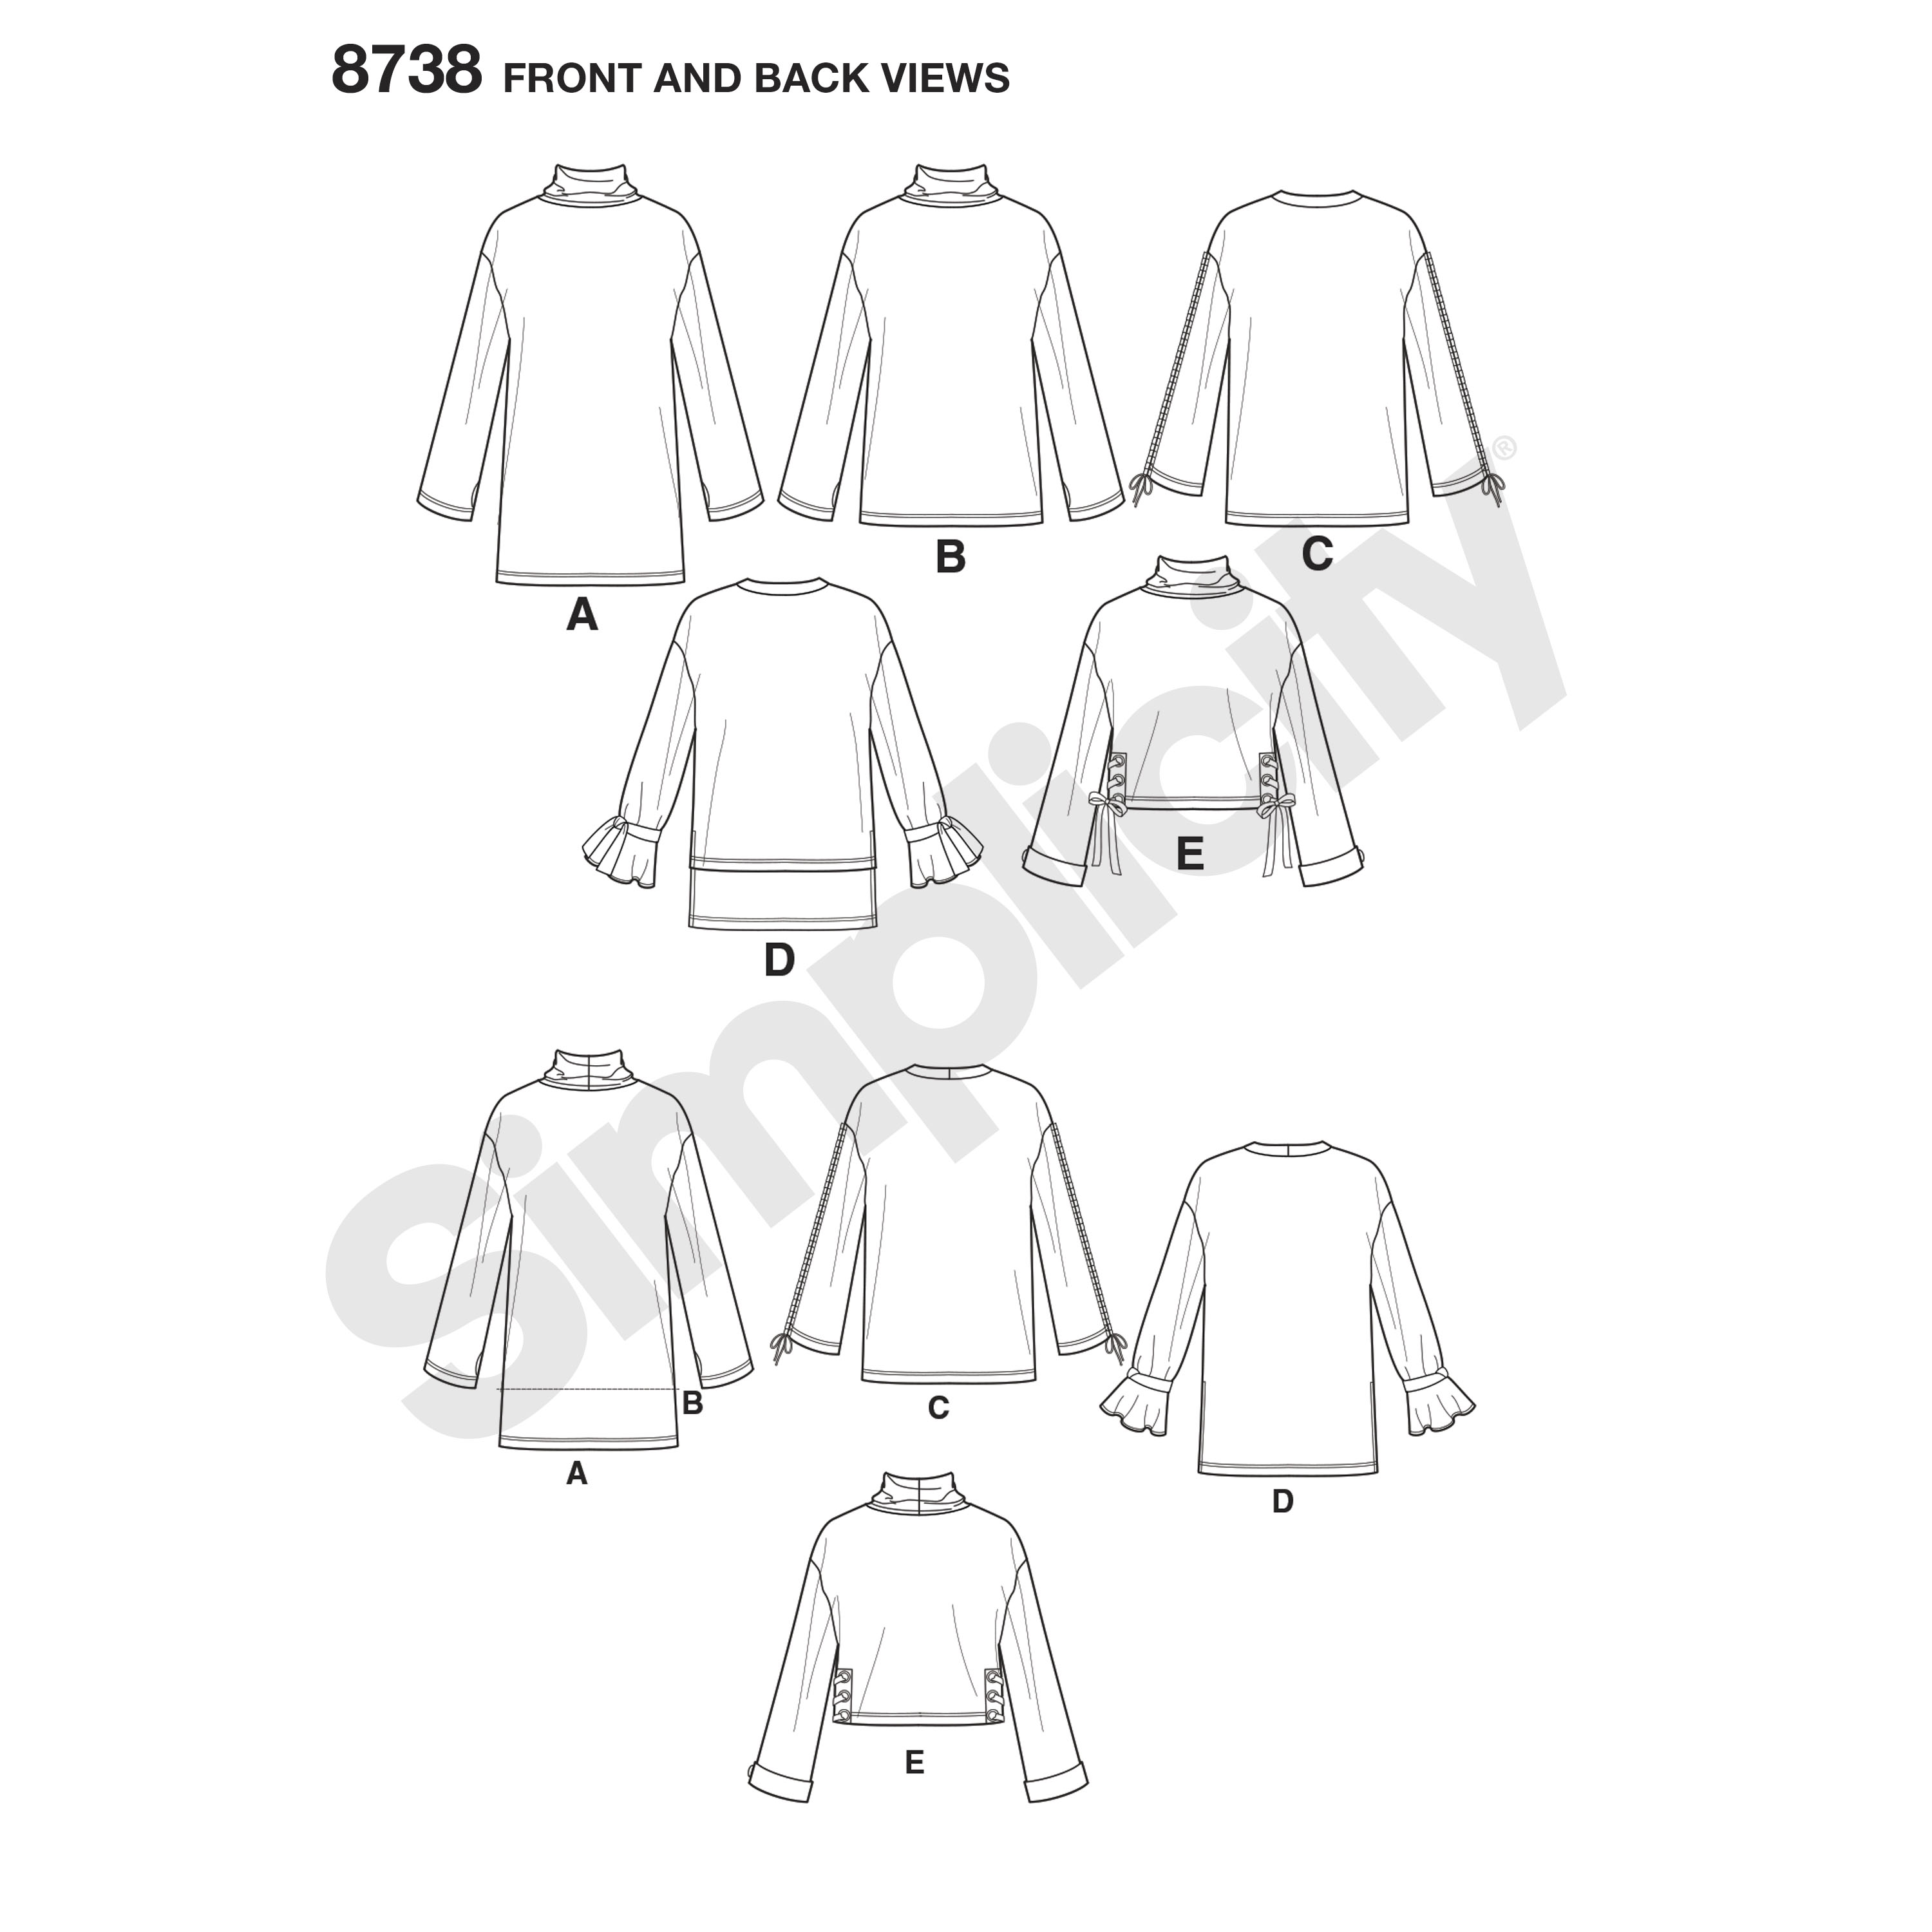 8738 - Sewing- Patterns- NZ - dresses, childrens, babies, toddlers ...